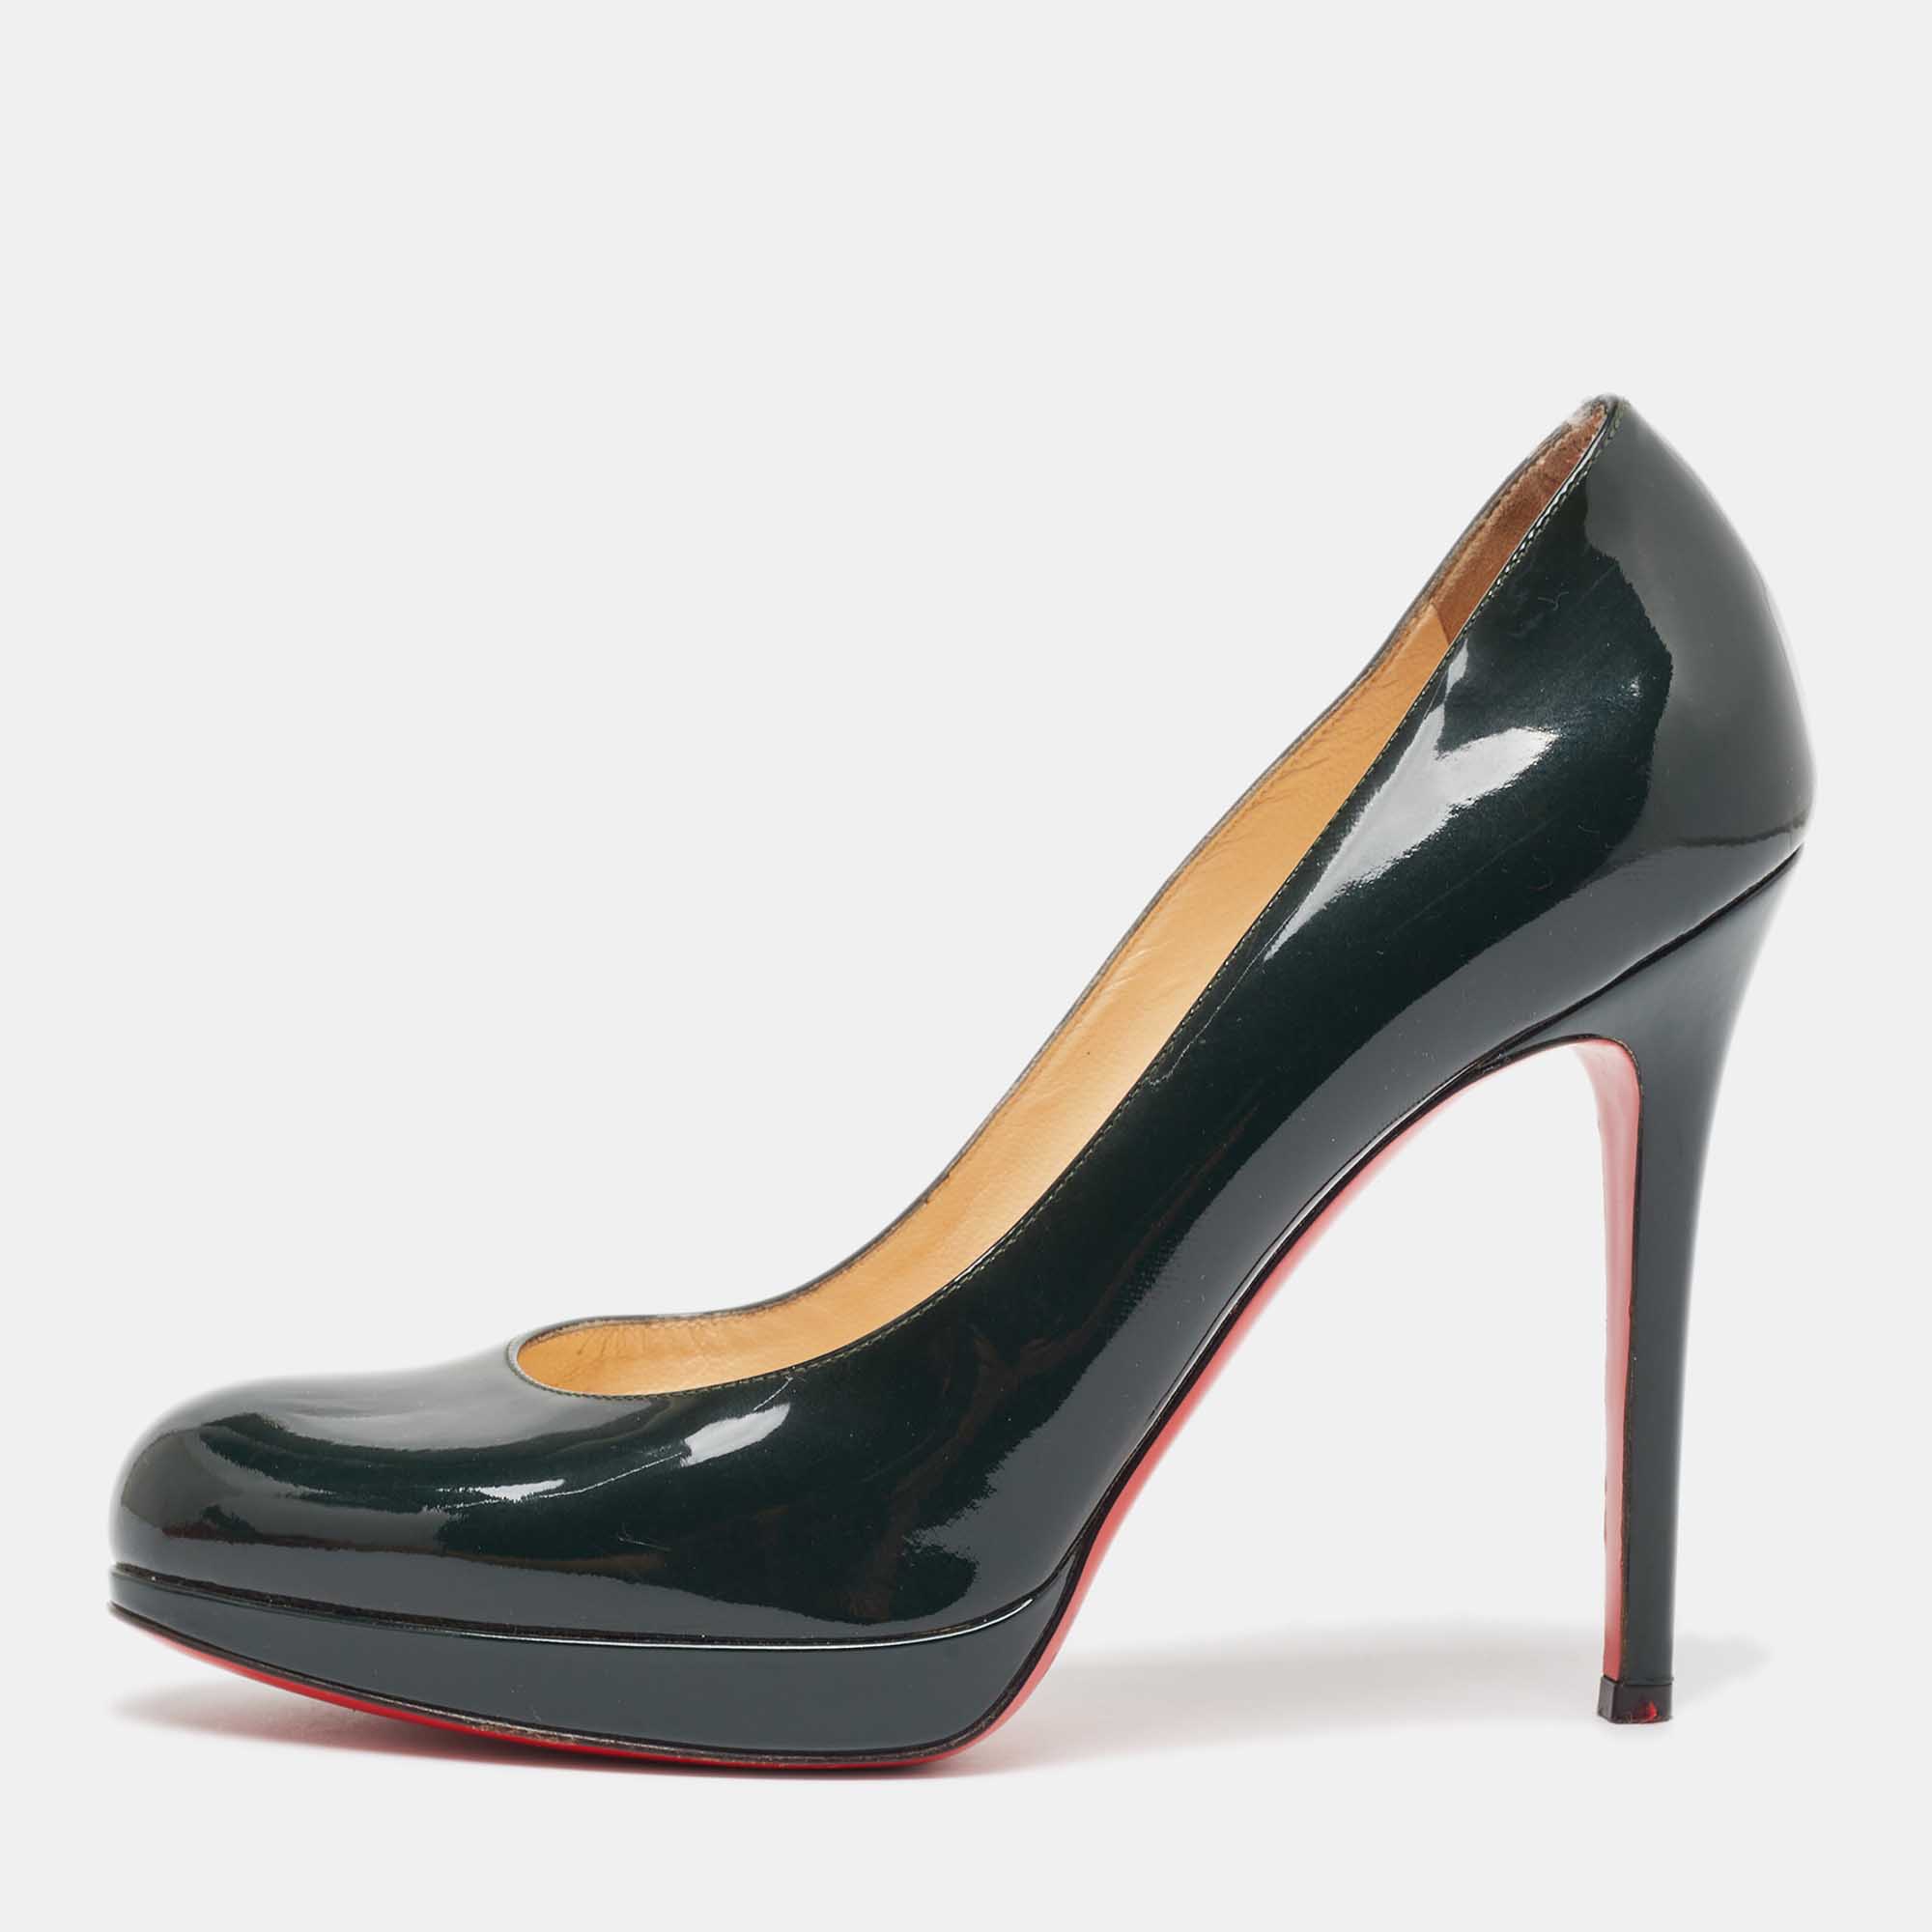 Christian louboutin green patent leather simple pumps size 37.5